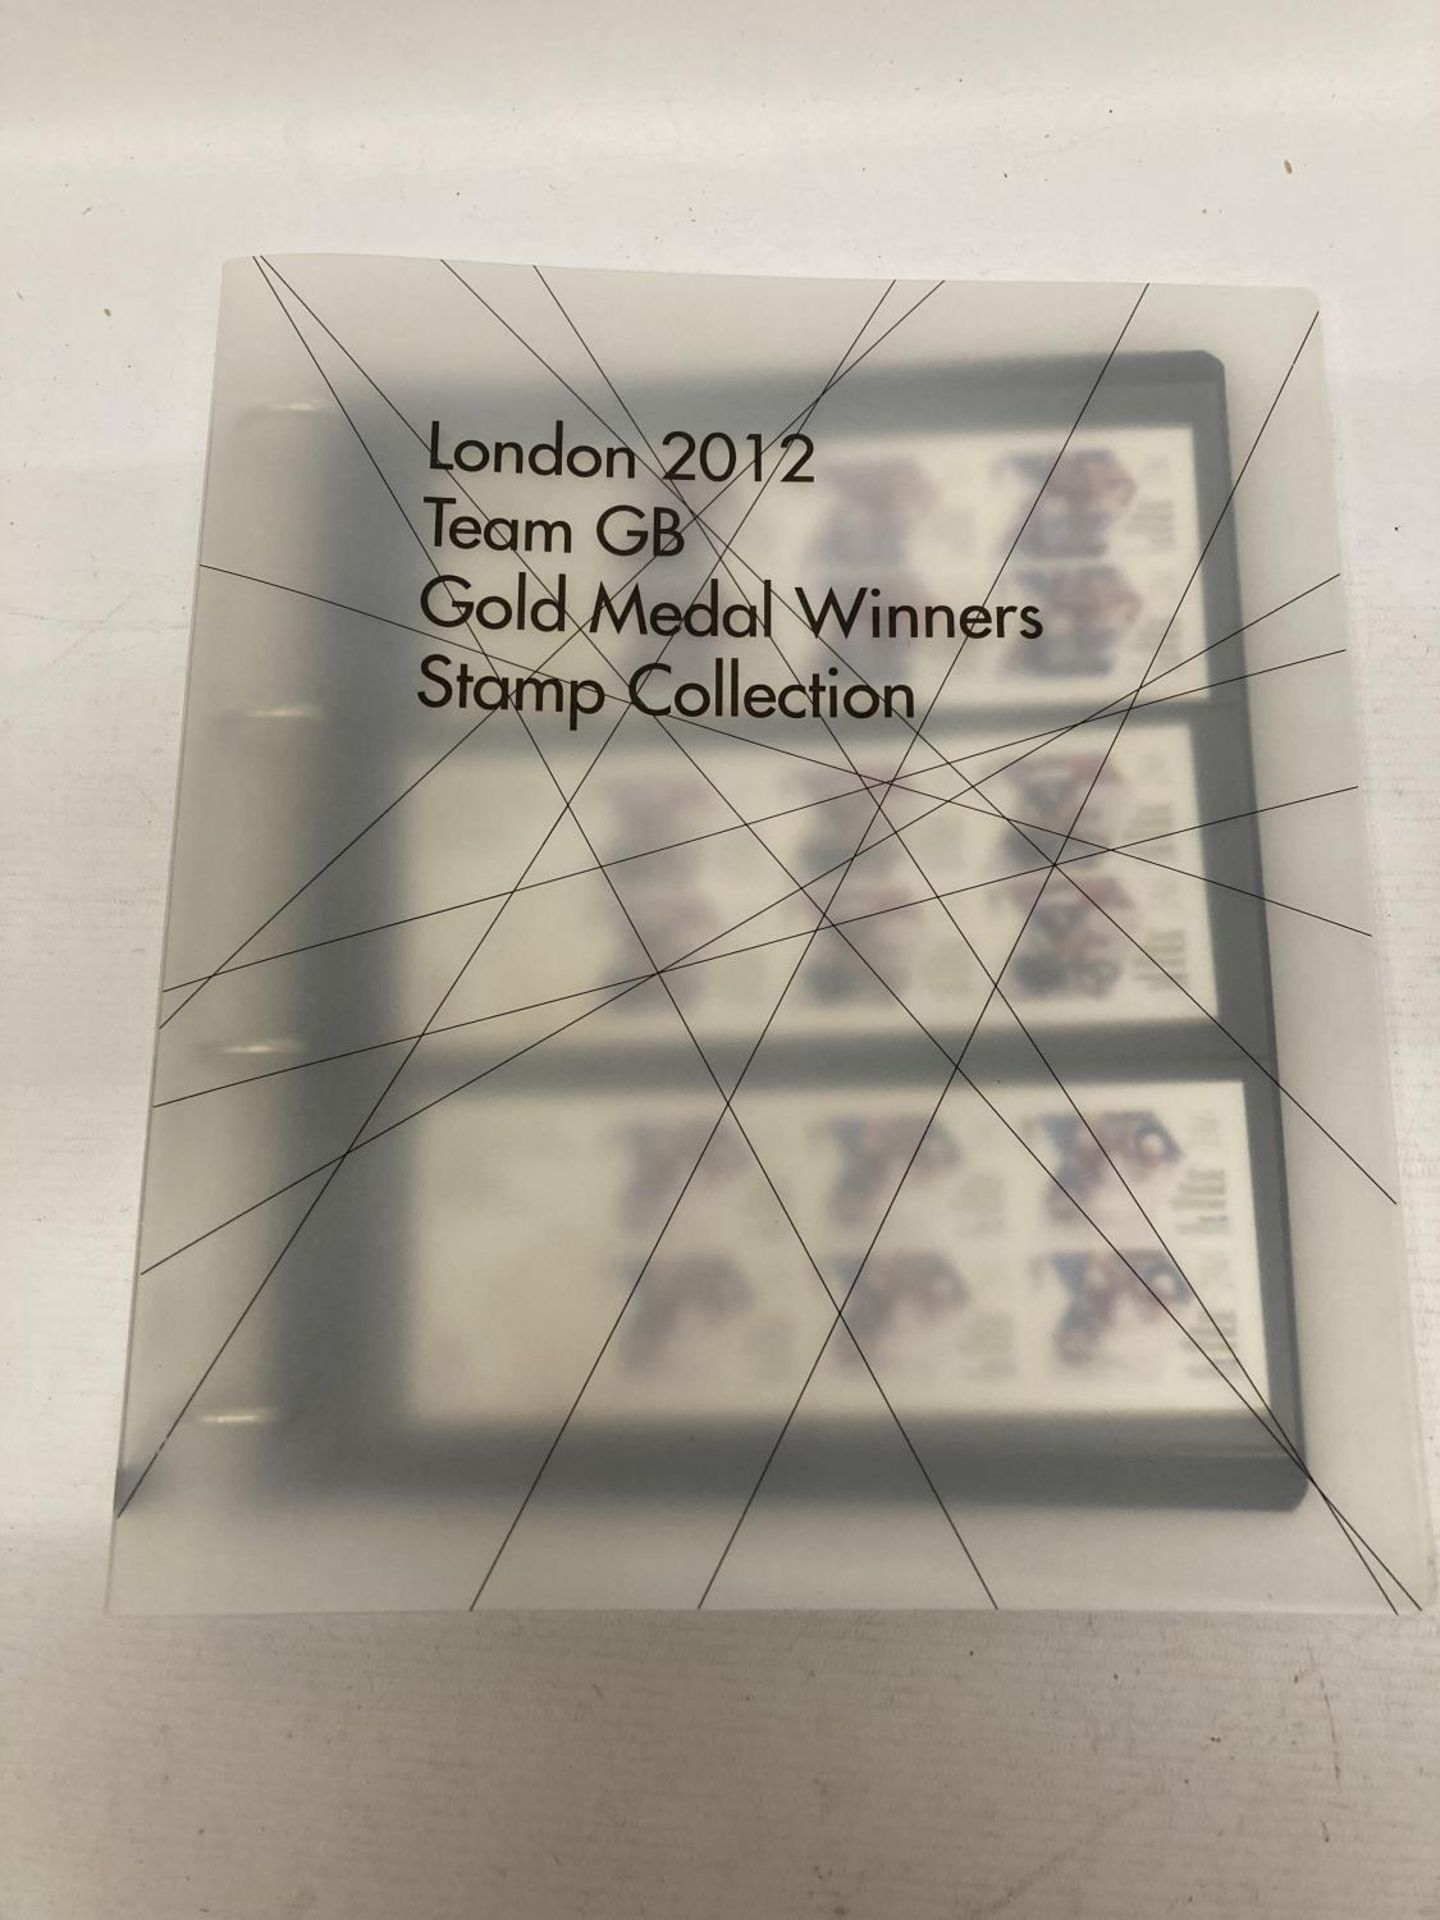 A LONDON 2012 TEAM GB GOLD MEDAL WINNERS STAMP COLLECTION FOLDER